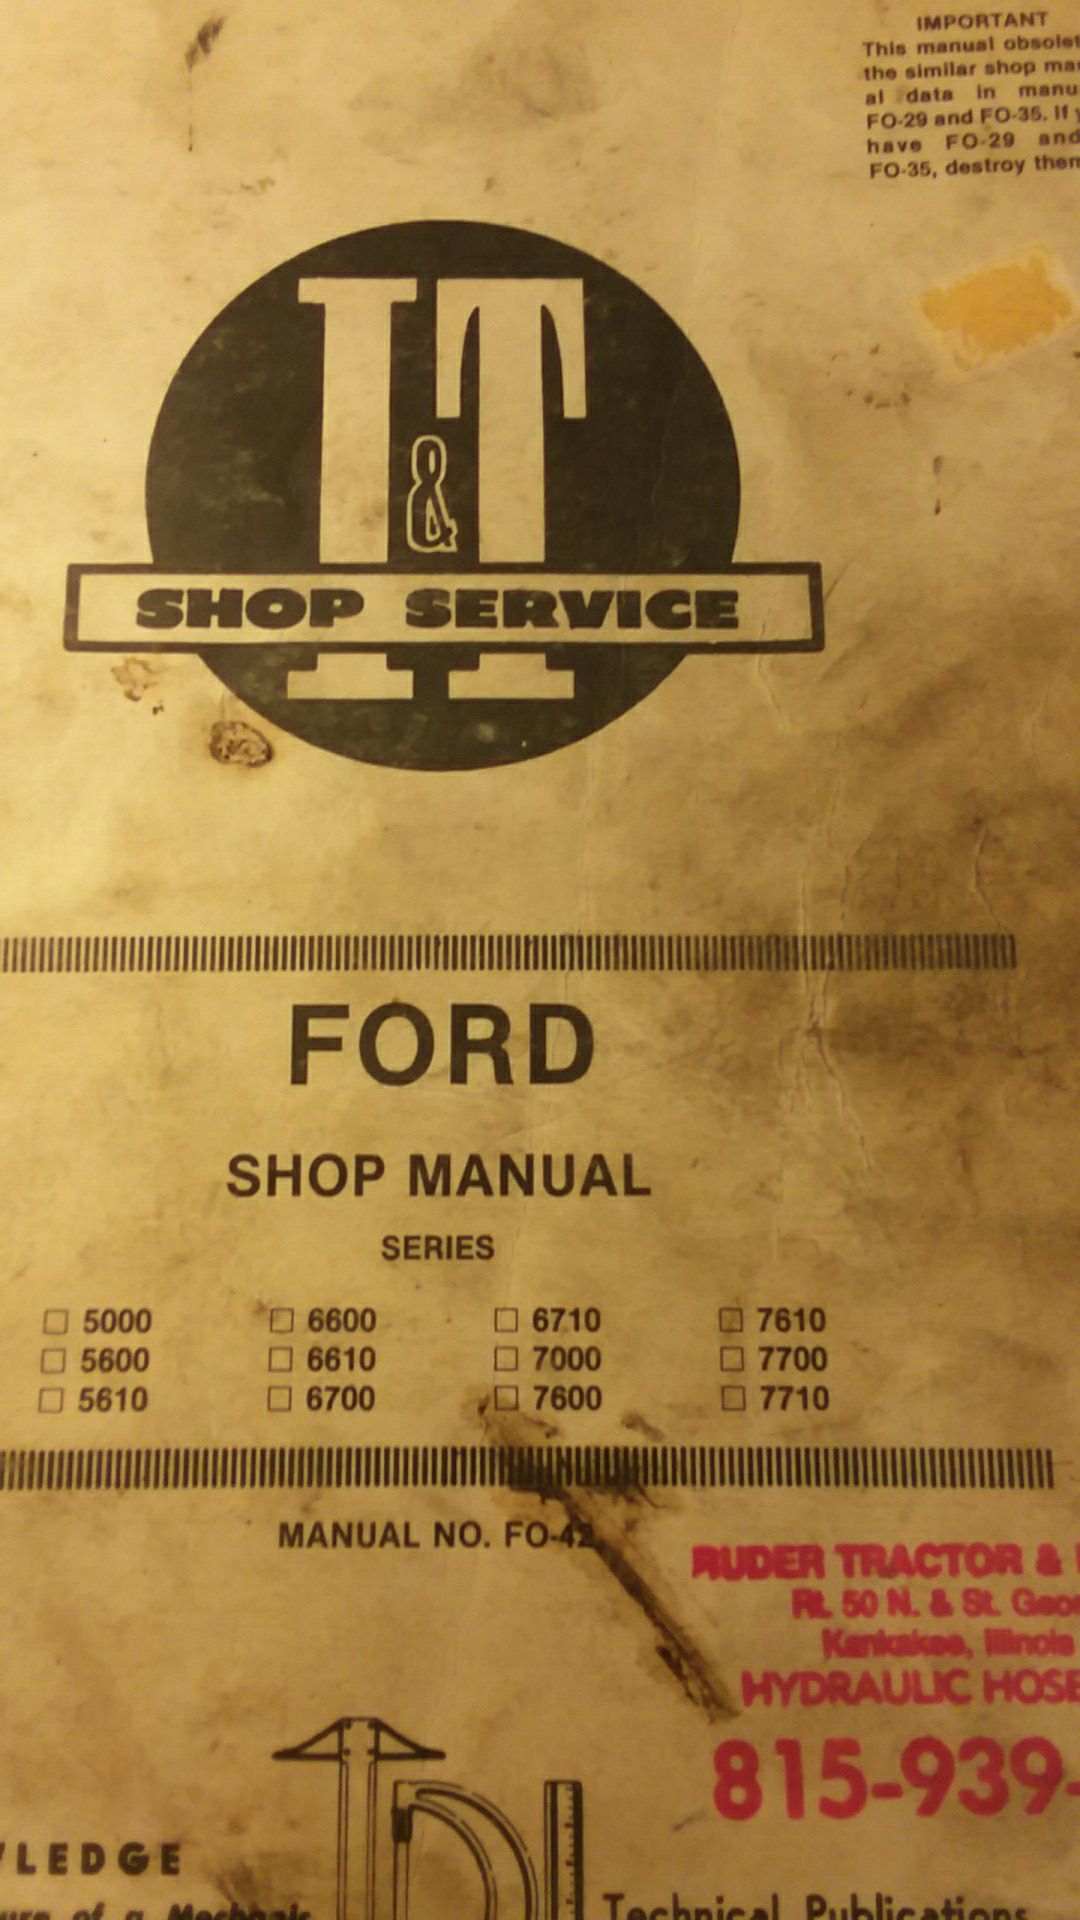 Ford tractor manual